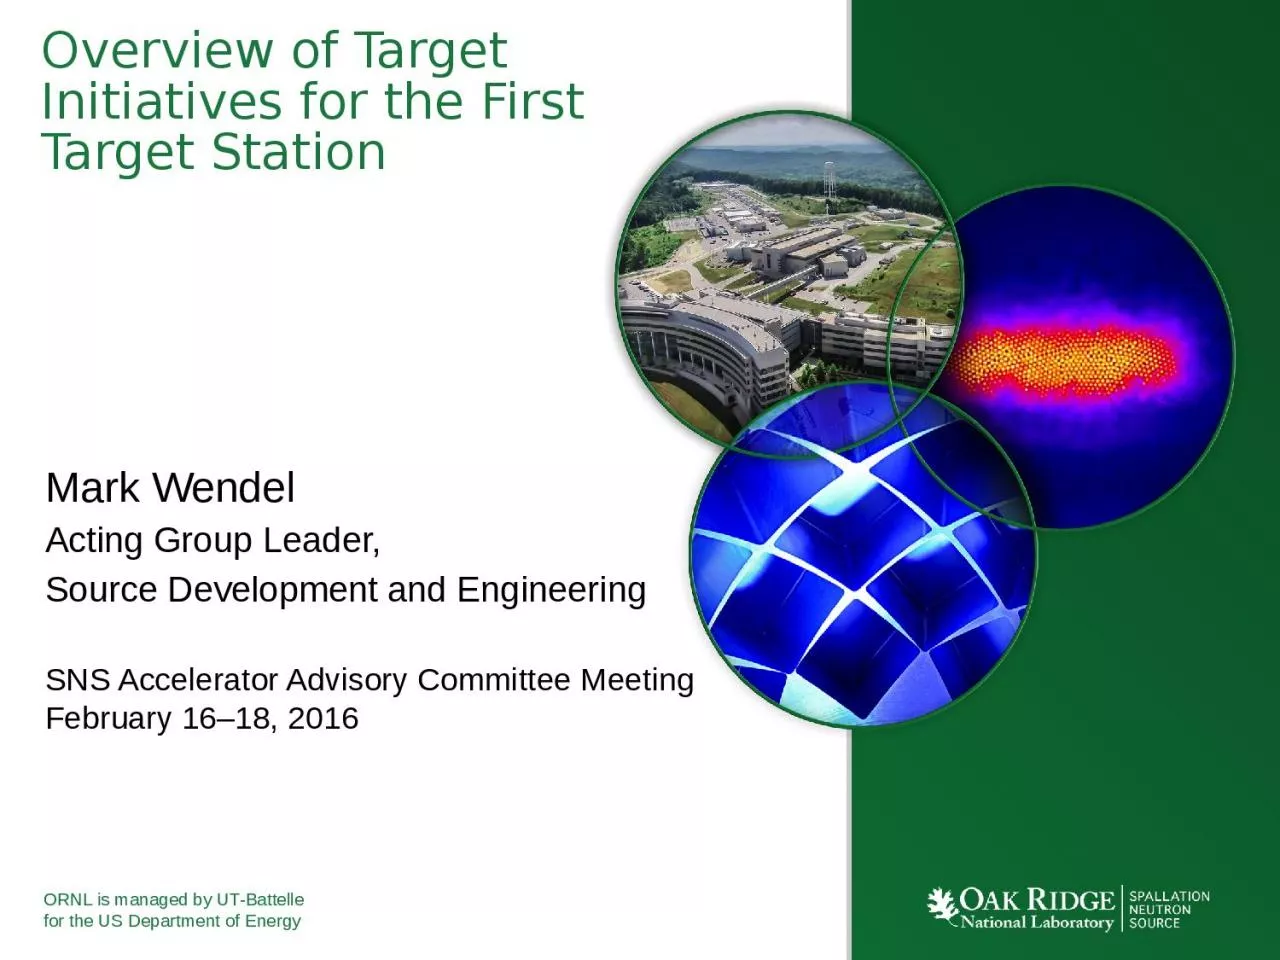 Overview of Target Initiatives for the First Target Station